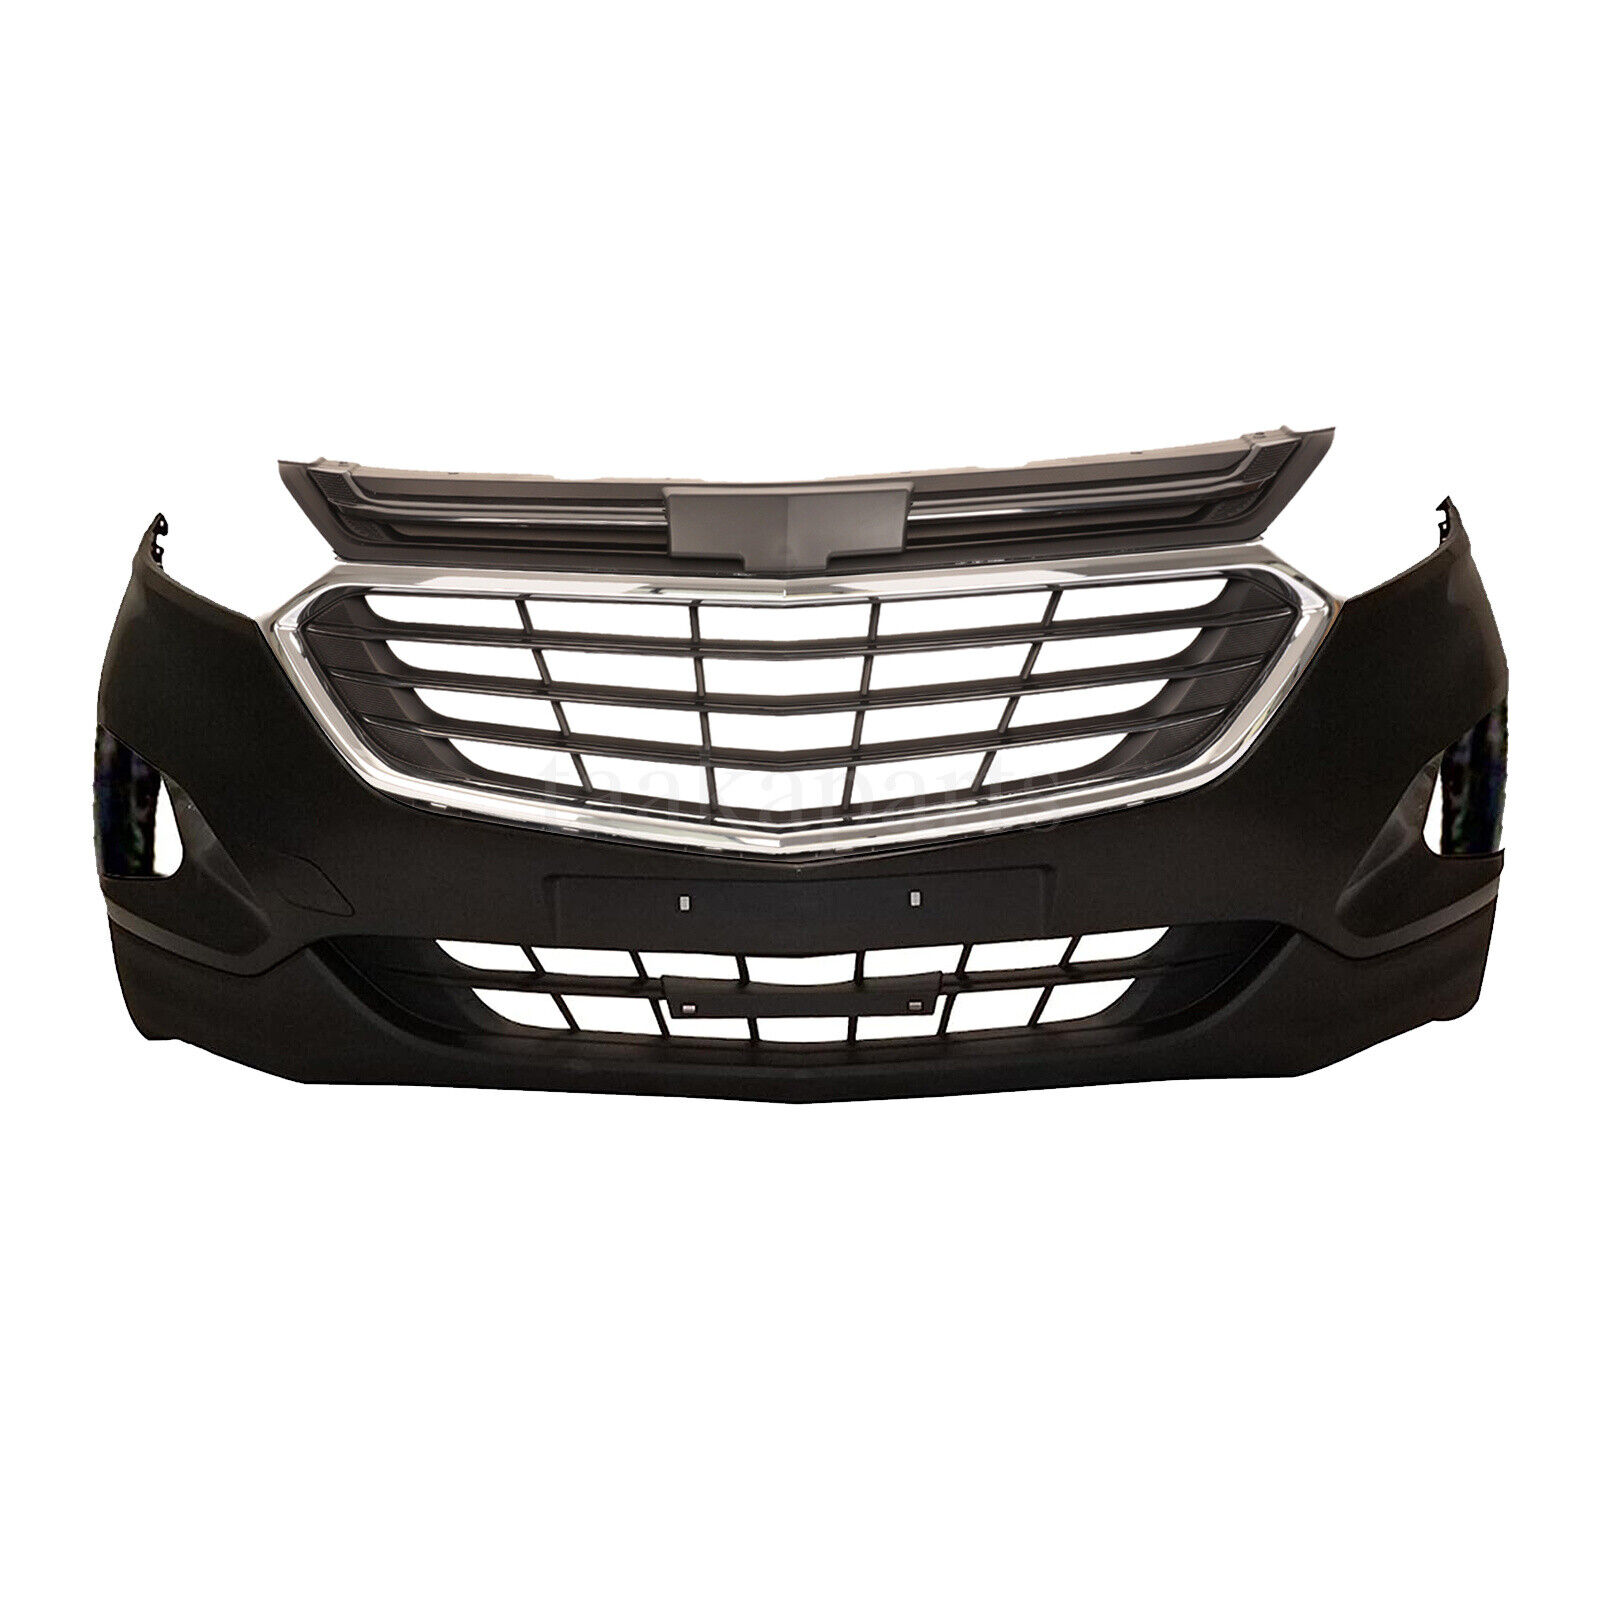 Front Bumper Cover Vlance Kit W/ Grill Grille For Chevrolet Equinox 2018-2021